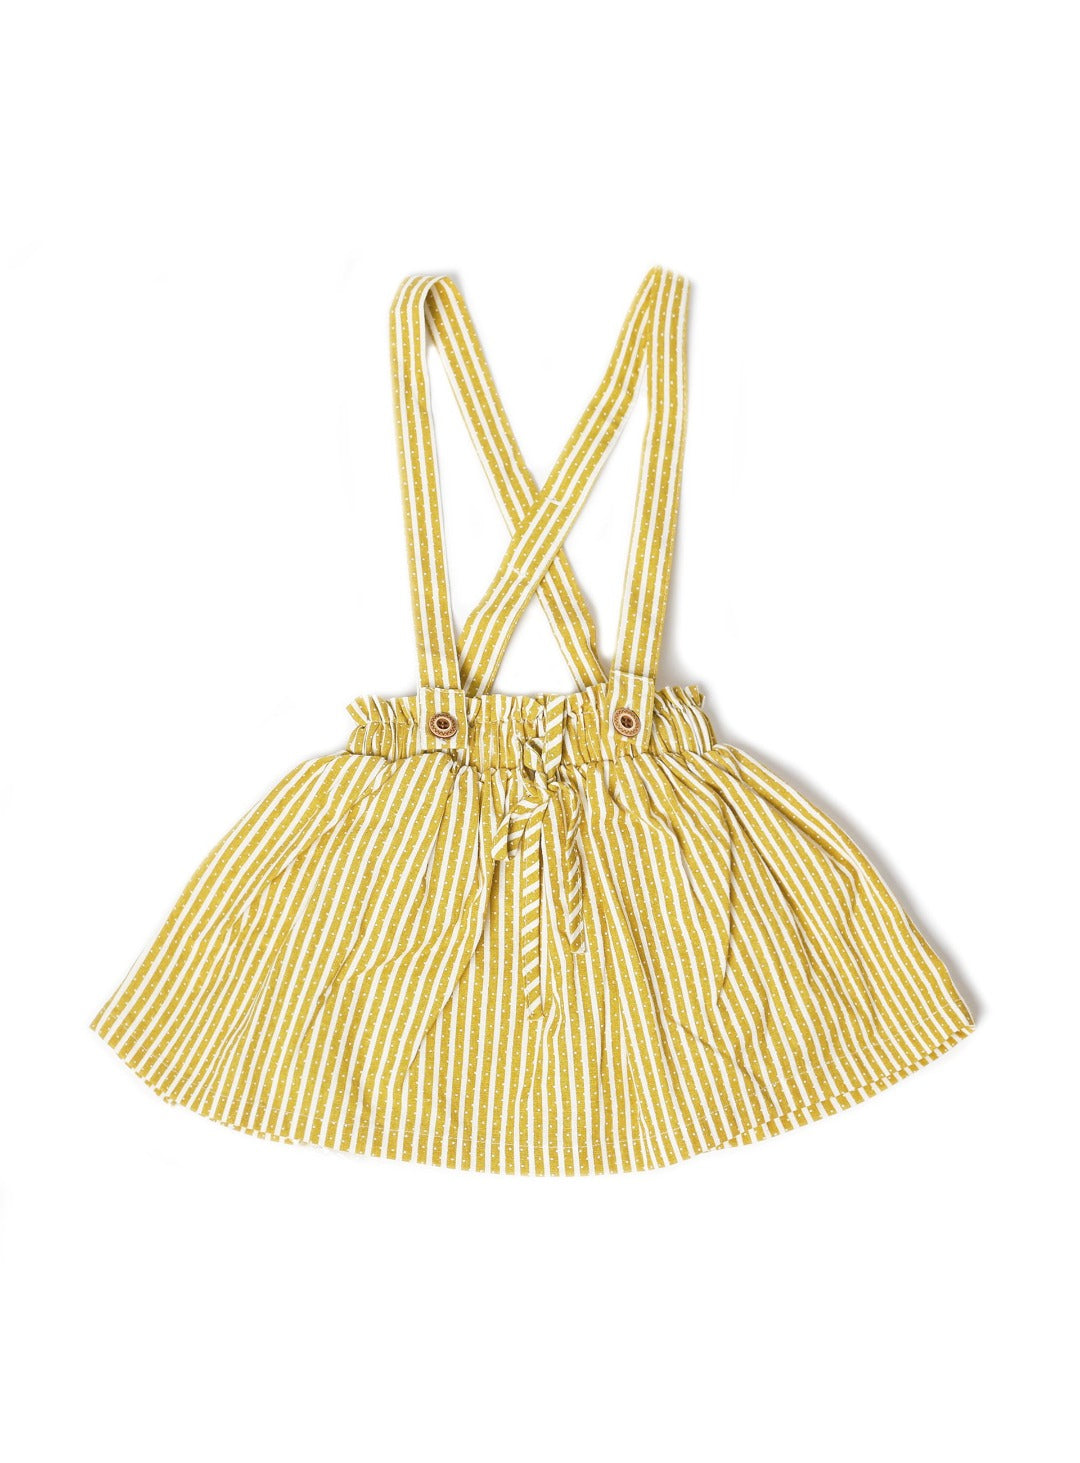 stripes daffodil yellow overall skirt